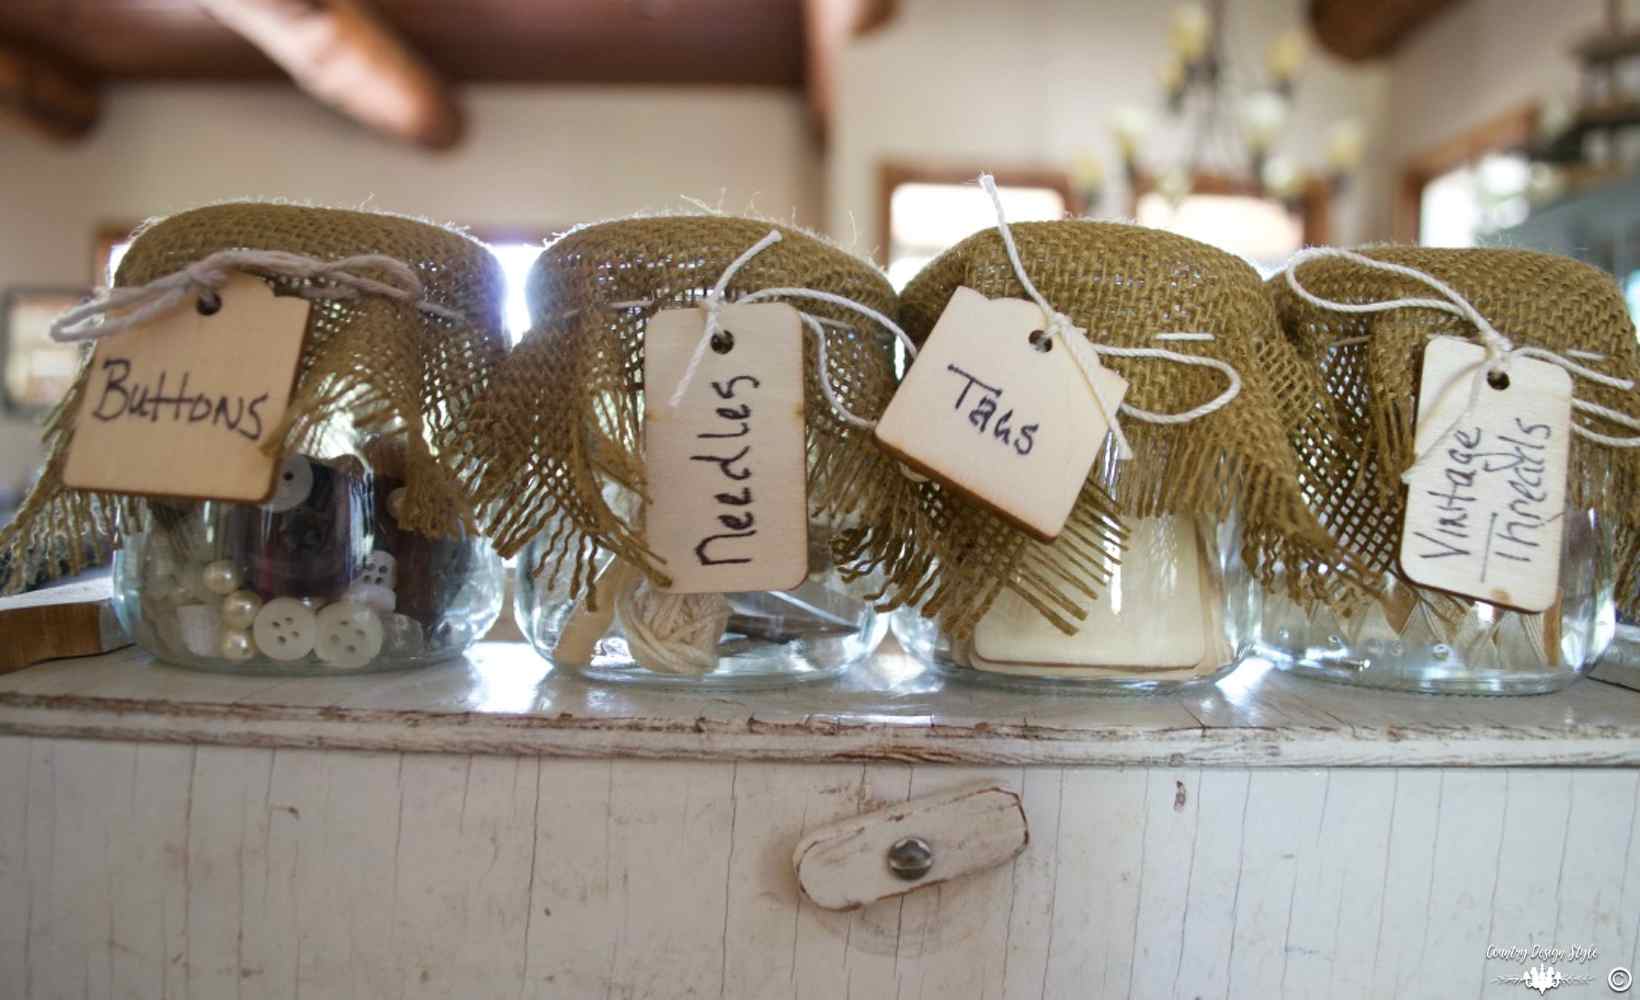 Craft Containers Organizing small items burlap covered jars | Country Design Style | countrydesignstyle.com